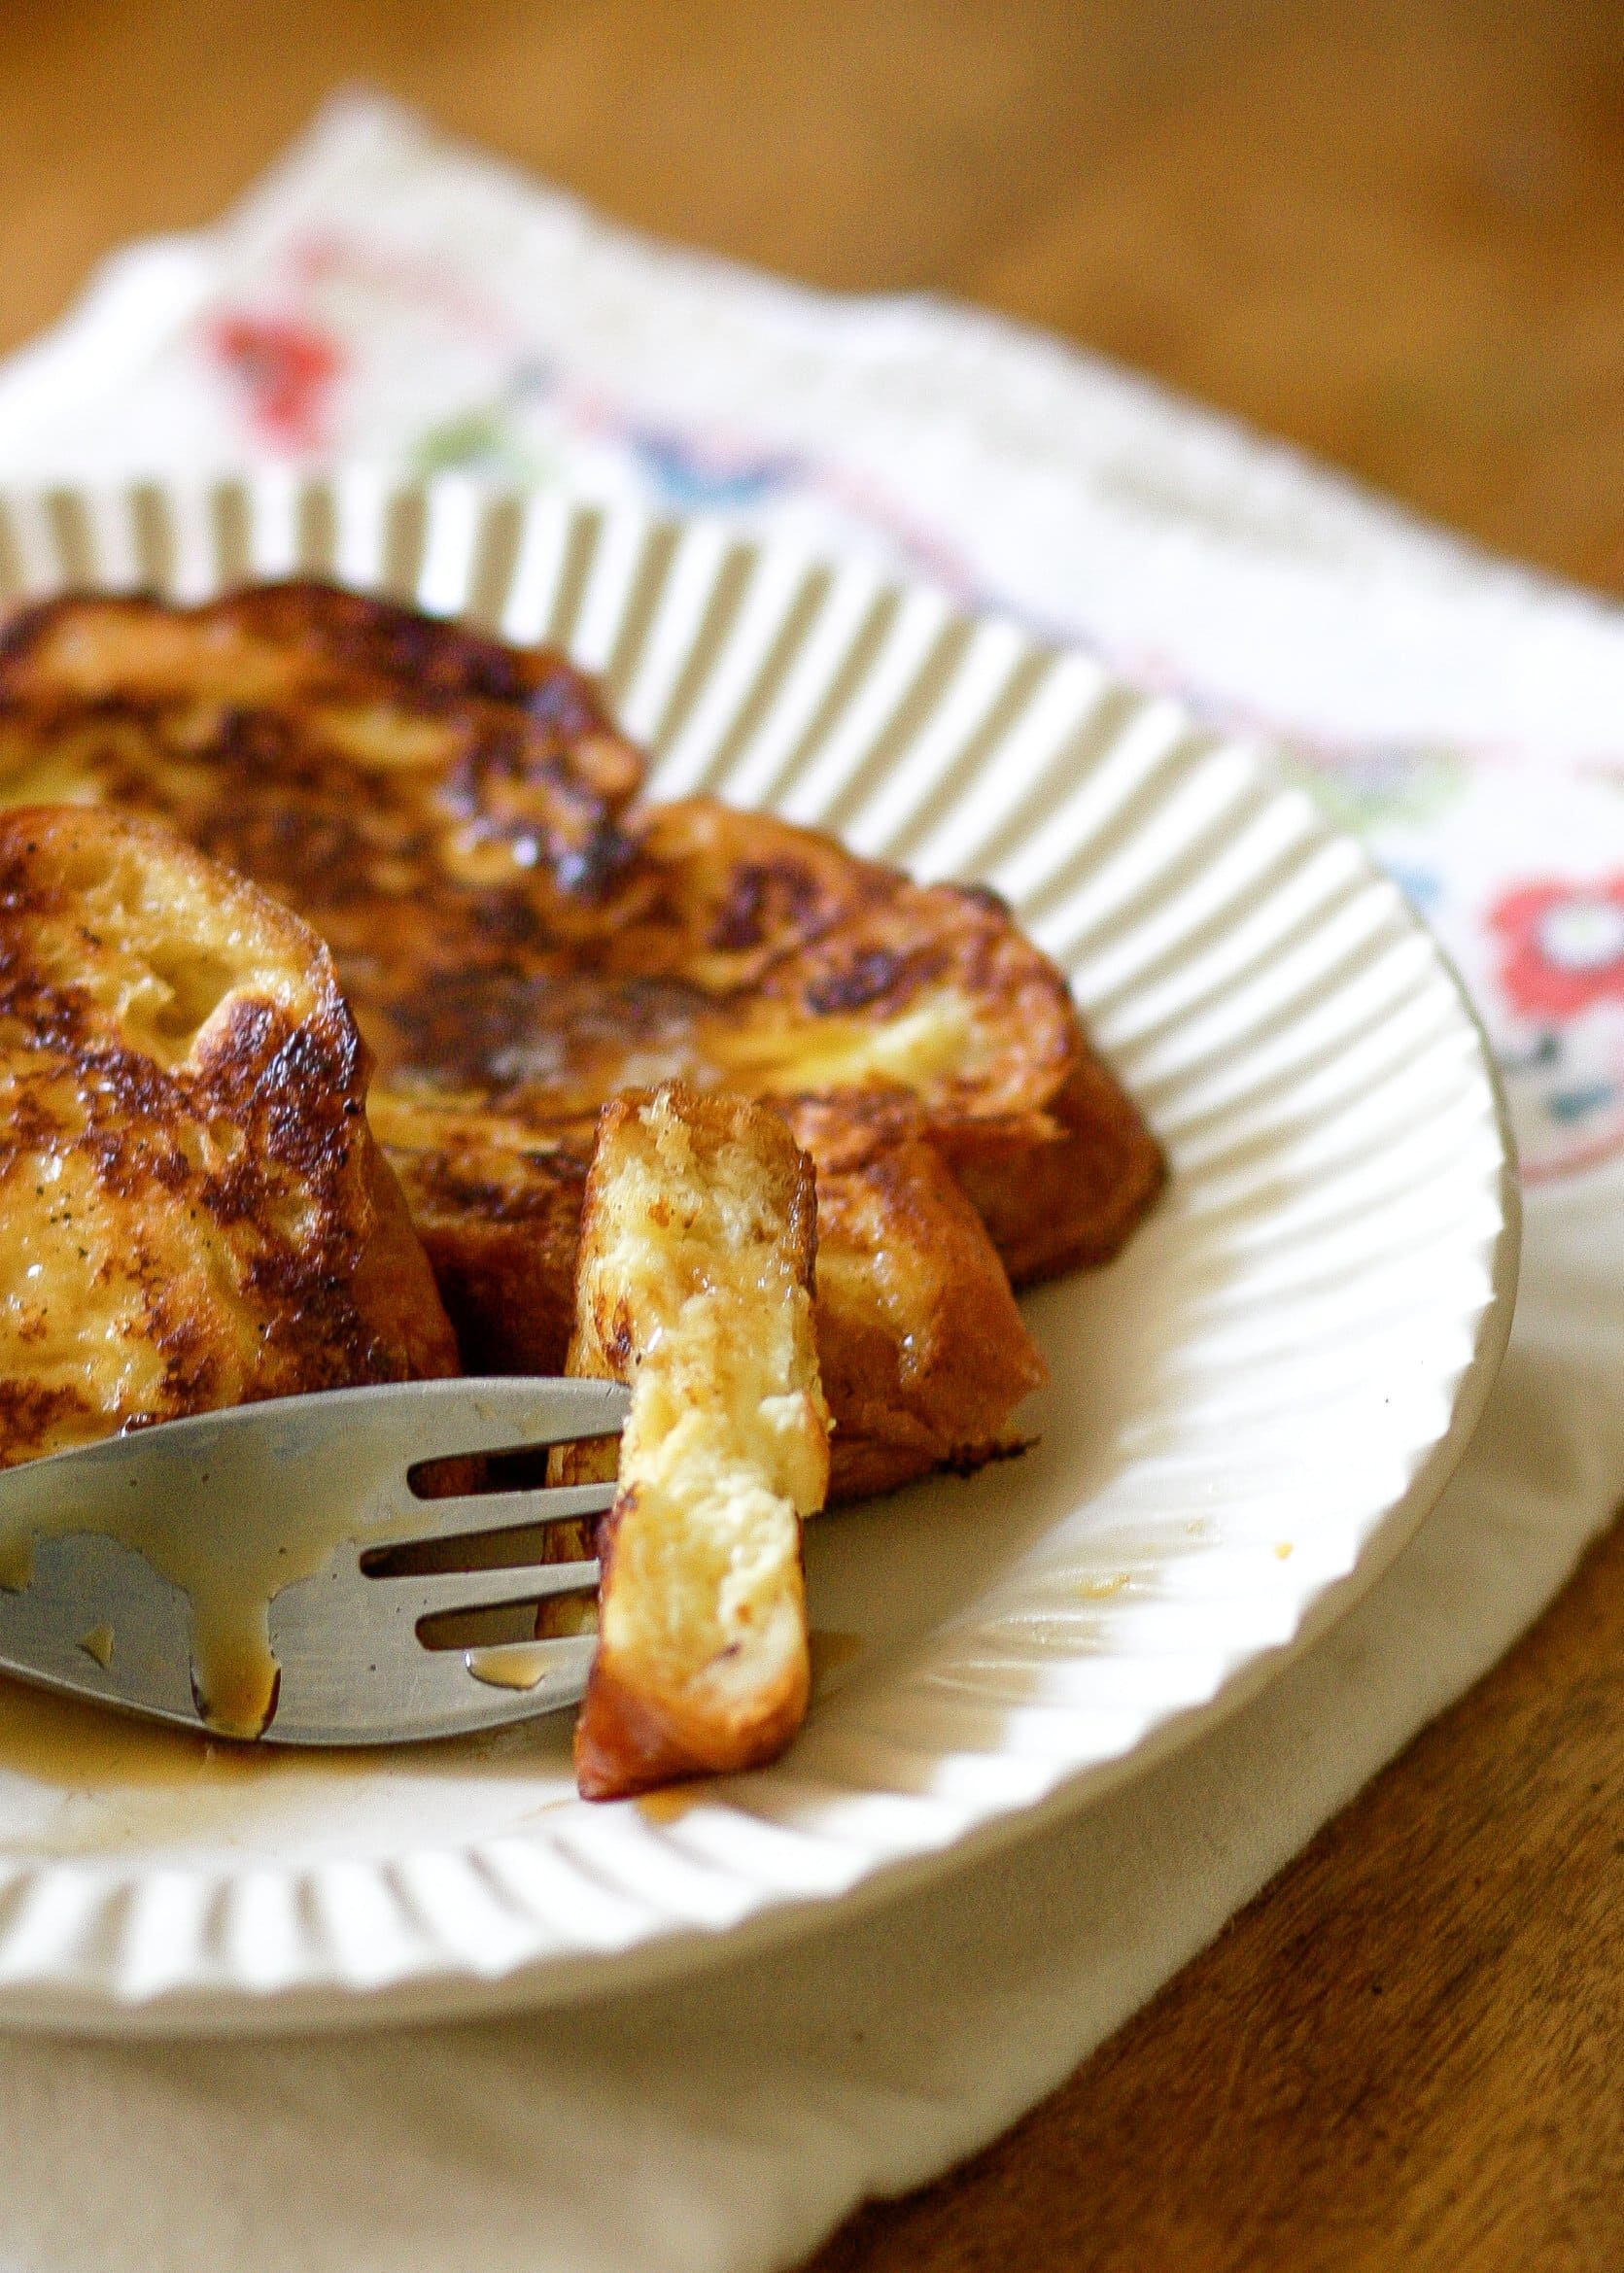 How To Make French Toast at Home - Recipe | Kitchn